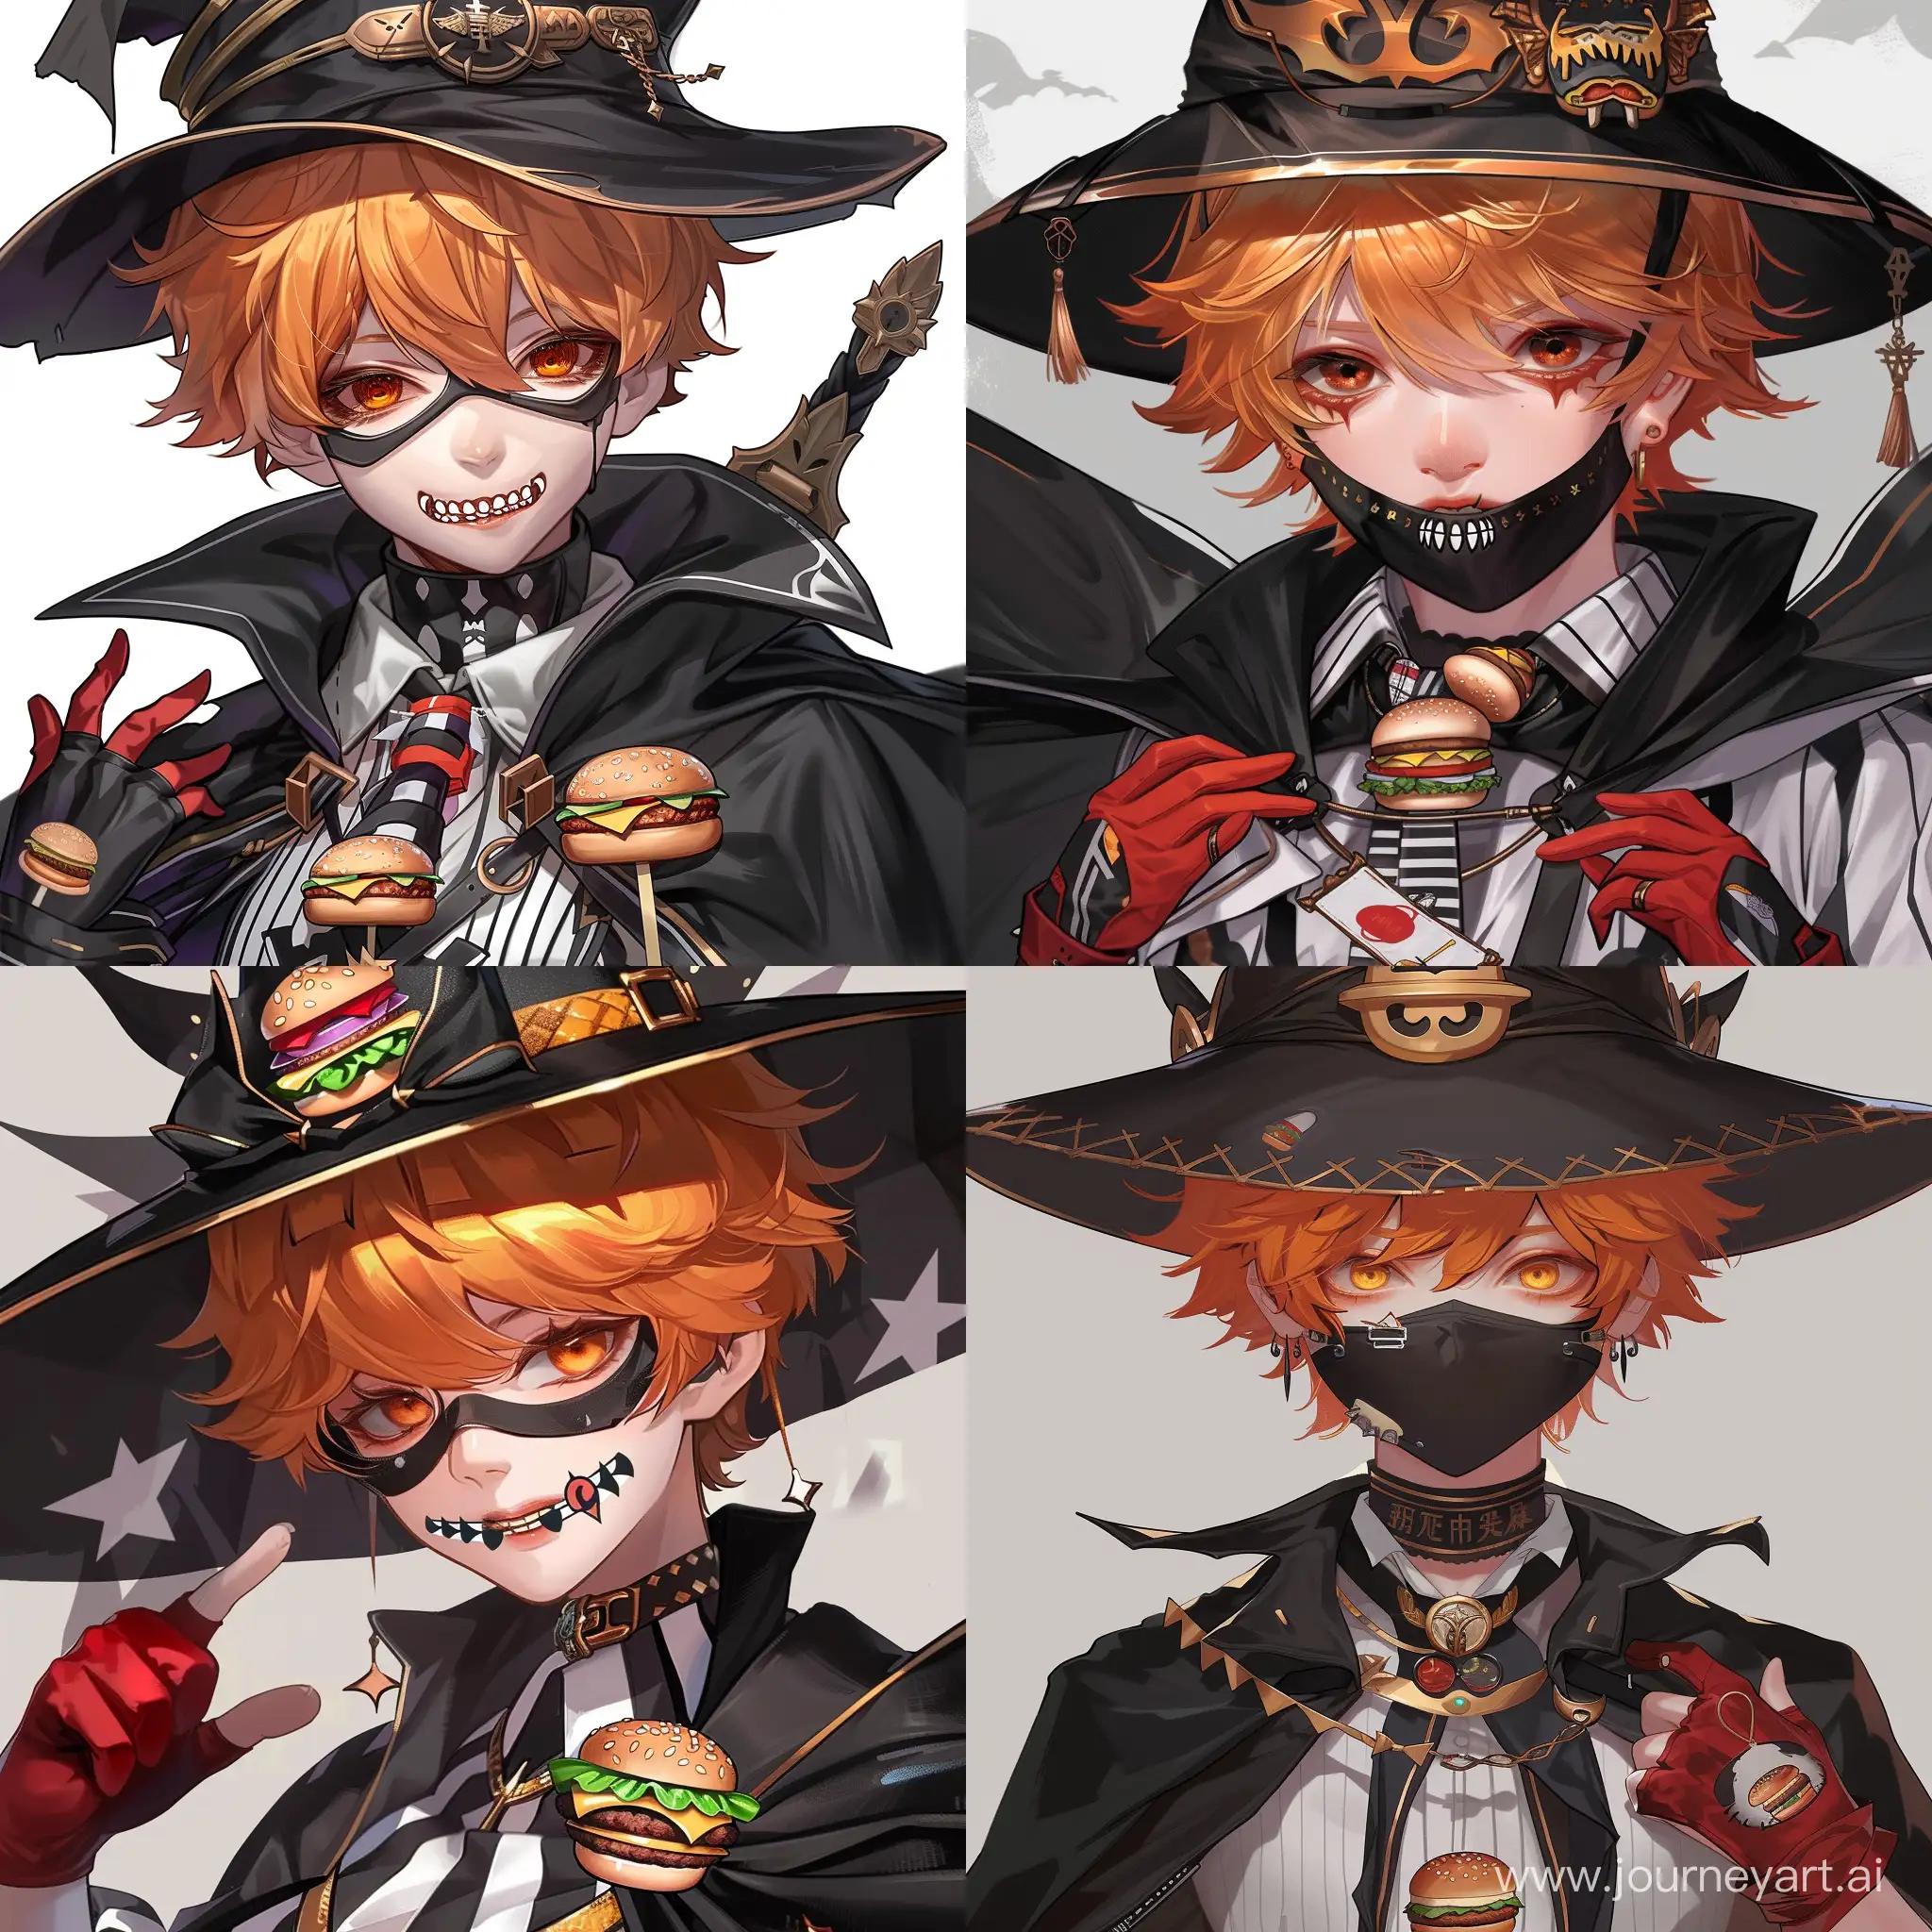 In the artstyle of a Chinese MMORPG. Young, handsome man. Short, orange hair. He wears a black, long rimmed hat. He wears a black eye mask. He wears a black and white striped shirt and wears red gloves. He is bucktoothed. He wears a tie with hamburgers on it. He wears a black cape.